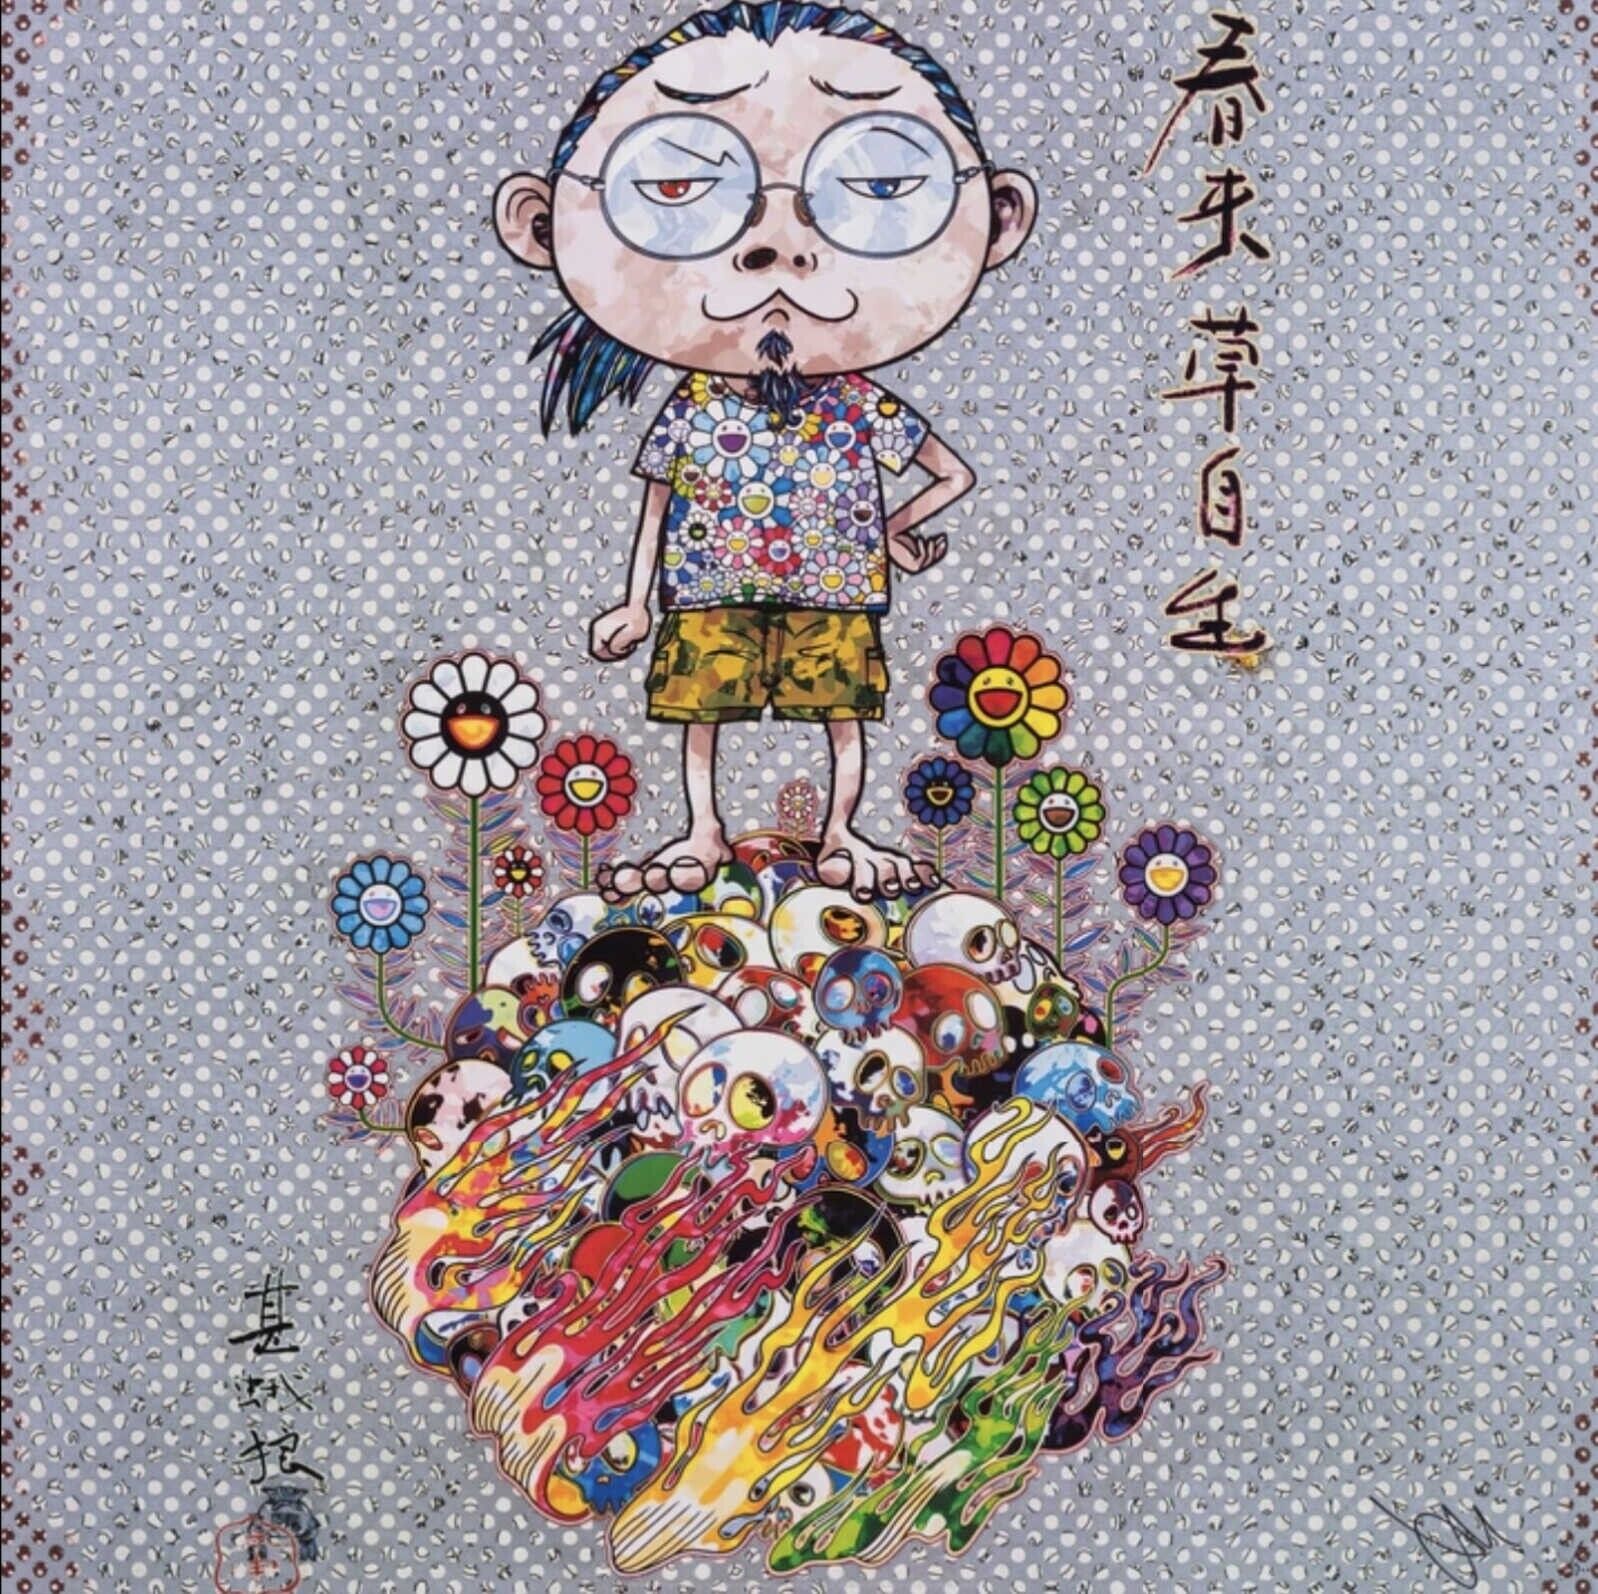 Takashi Murakami WITH THE COMING OF SPRING, THE GRASS RETURNS  signed print